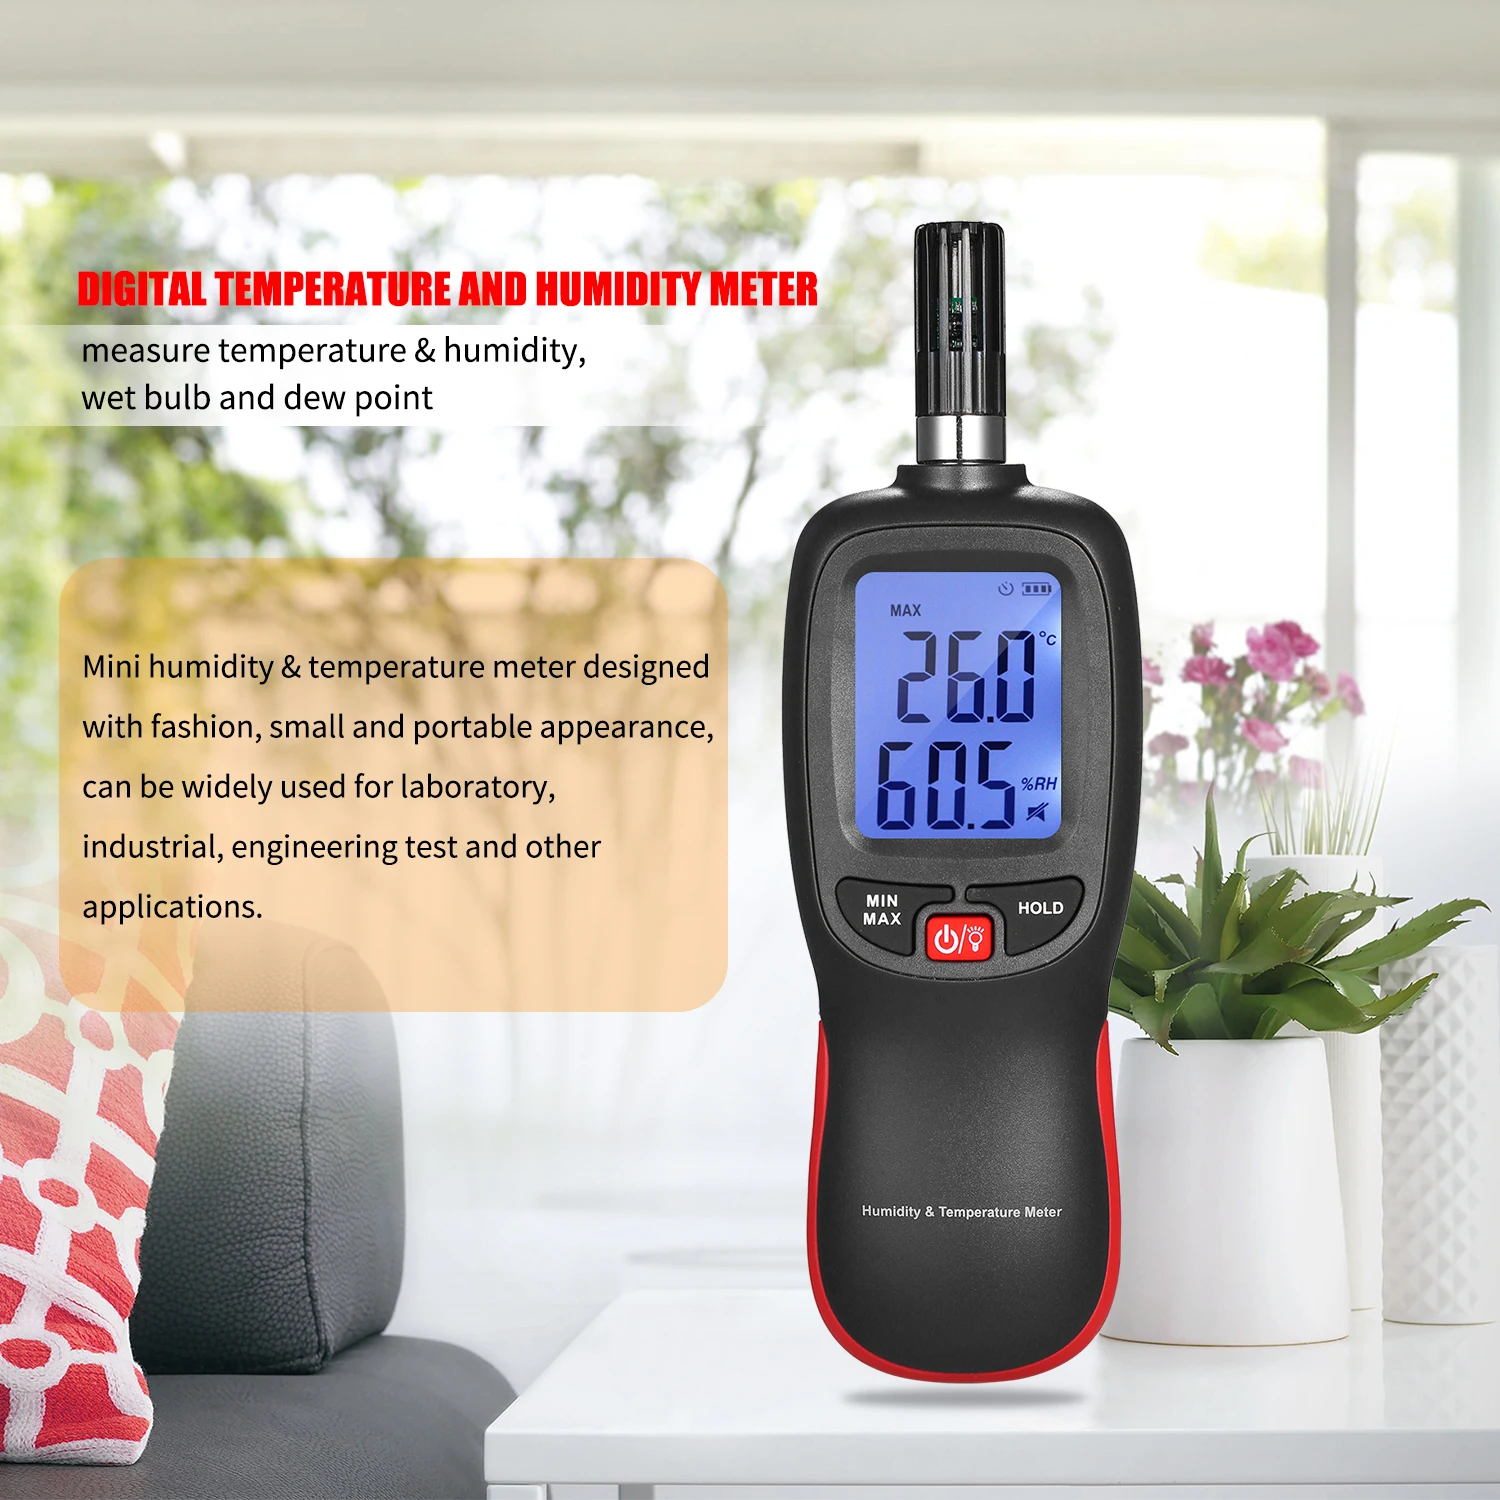 LCD Digital Mini Thermometer Hygrometer Psychrometer Wet Bulb Dew Point Temperature Detector With Max/Min/Data Hold Mode